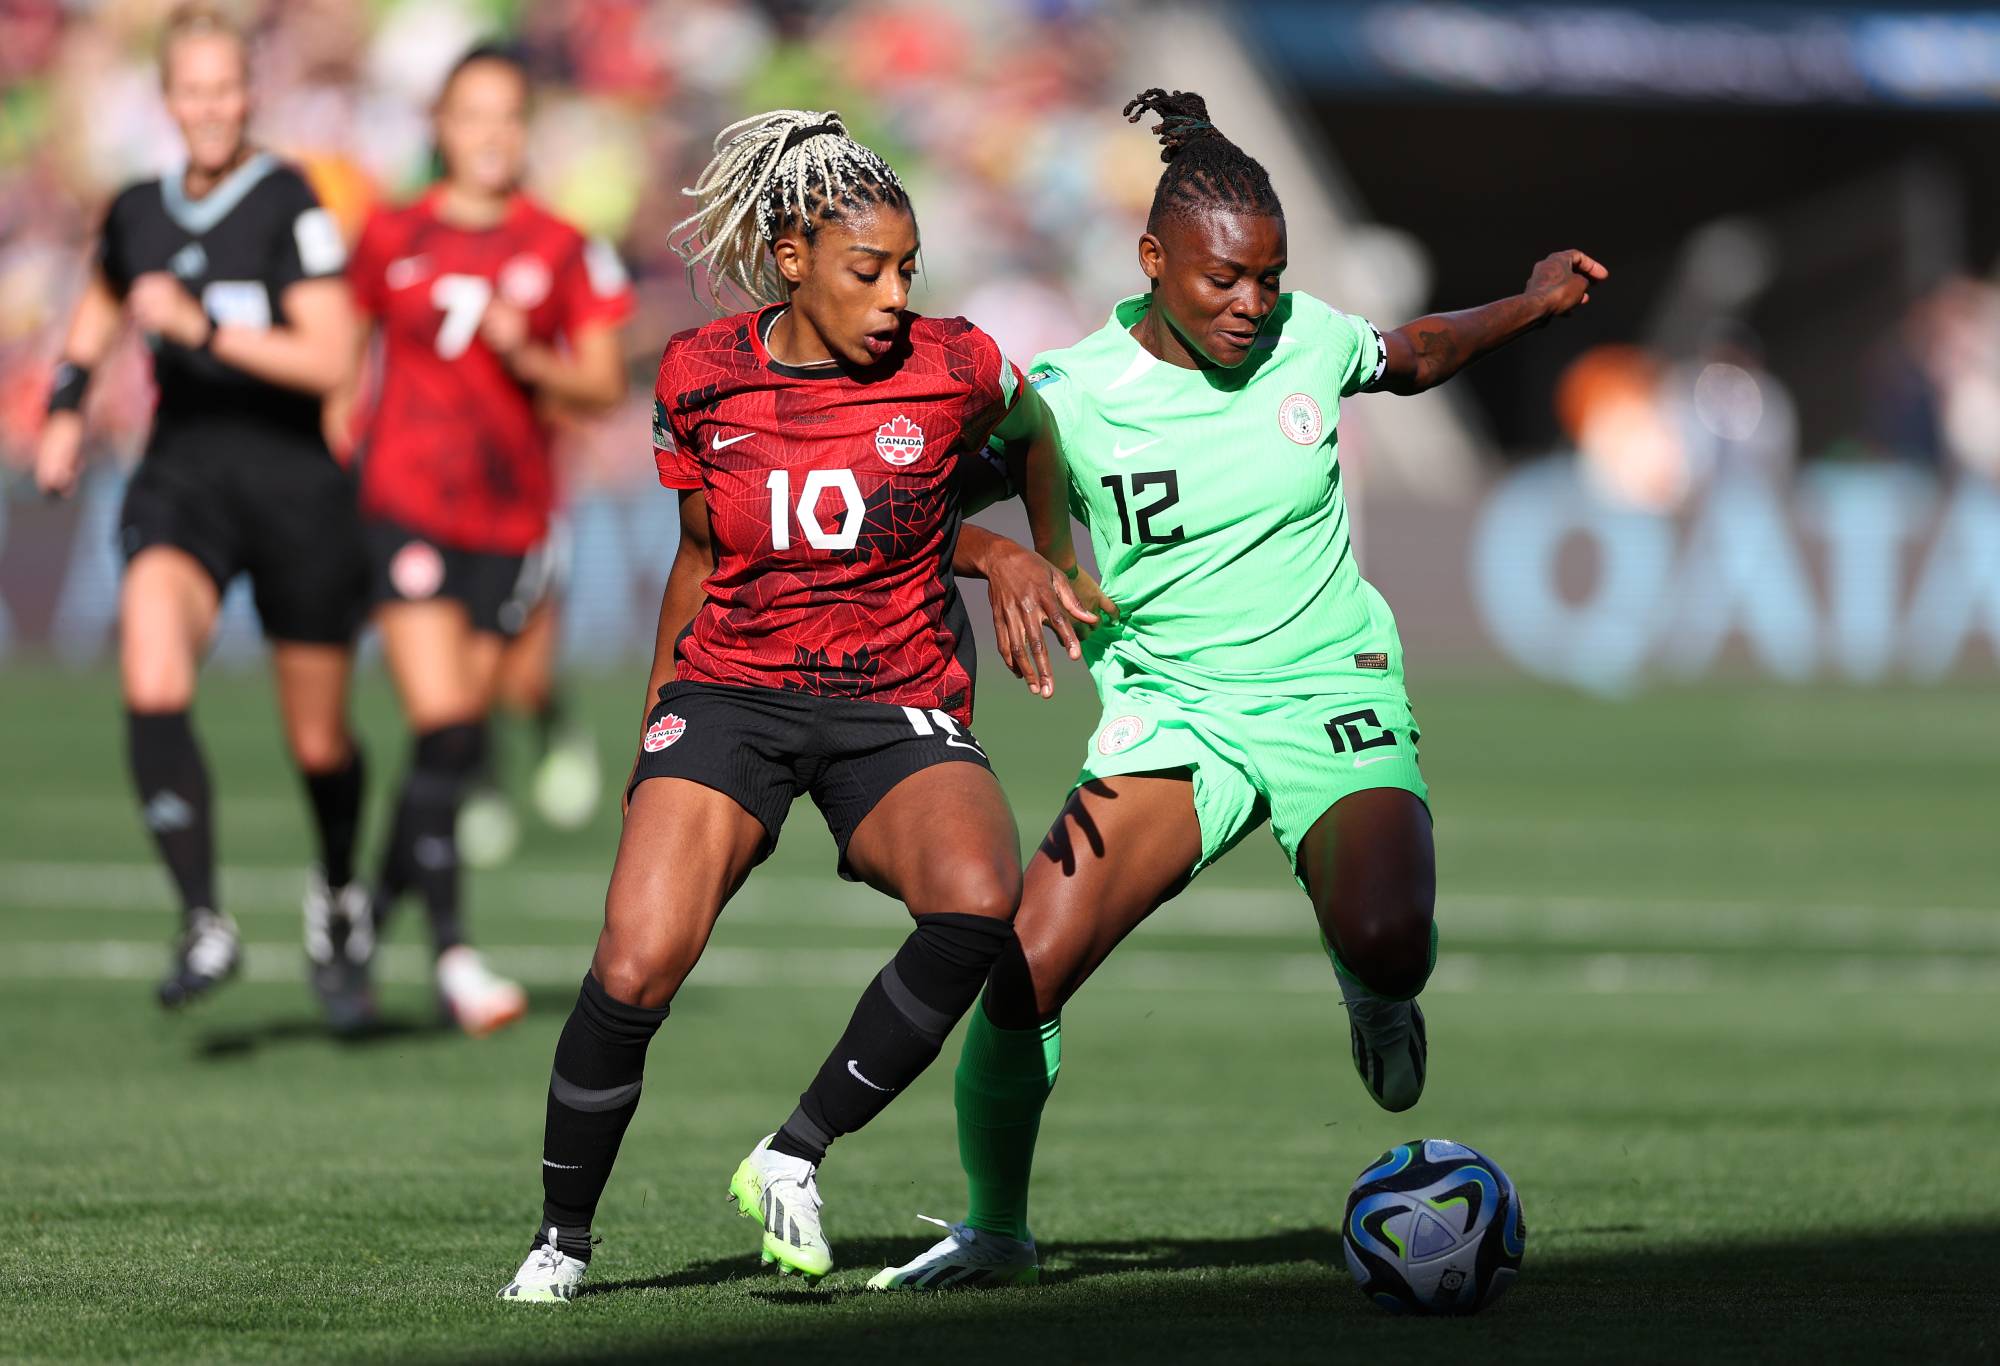 Uchenna Kanu of Nigeria and Ashley Lawrence of Canada compete for the ball during the FIFA Women's World Cup Australia & New Zealand 2023 Group B match between Nigeria and Canada at Melbourne Rectangular Stadium on July 21, 2023 in Melbourne, Australia. (Photo by Elsa - FIFA/FIFA via Getty Images)